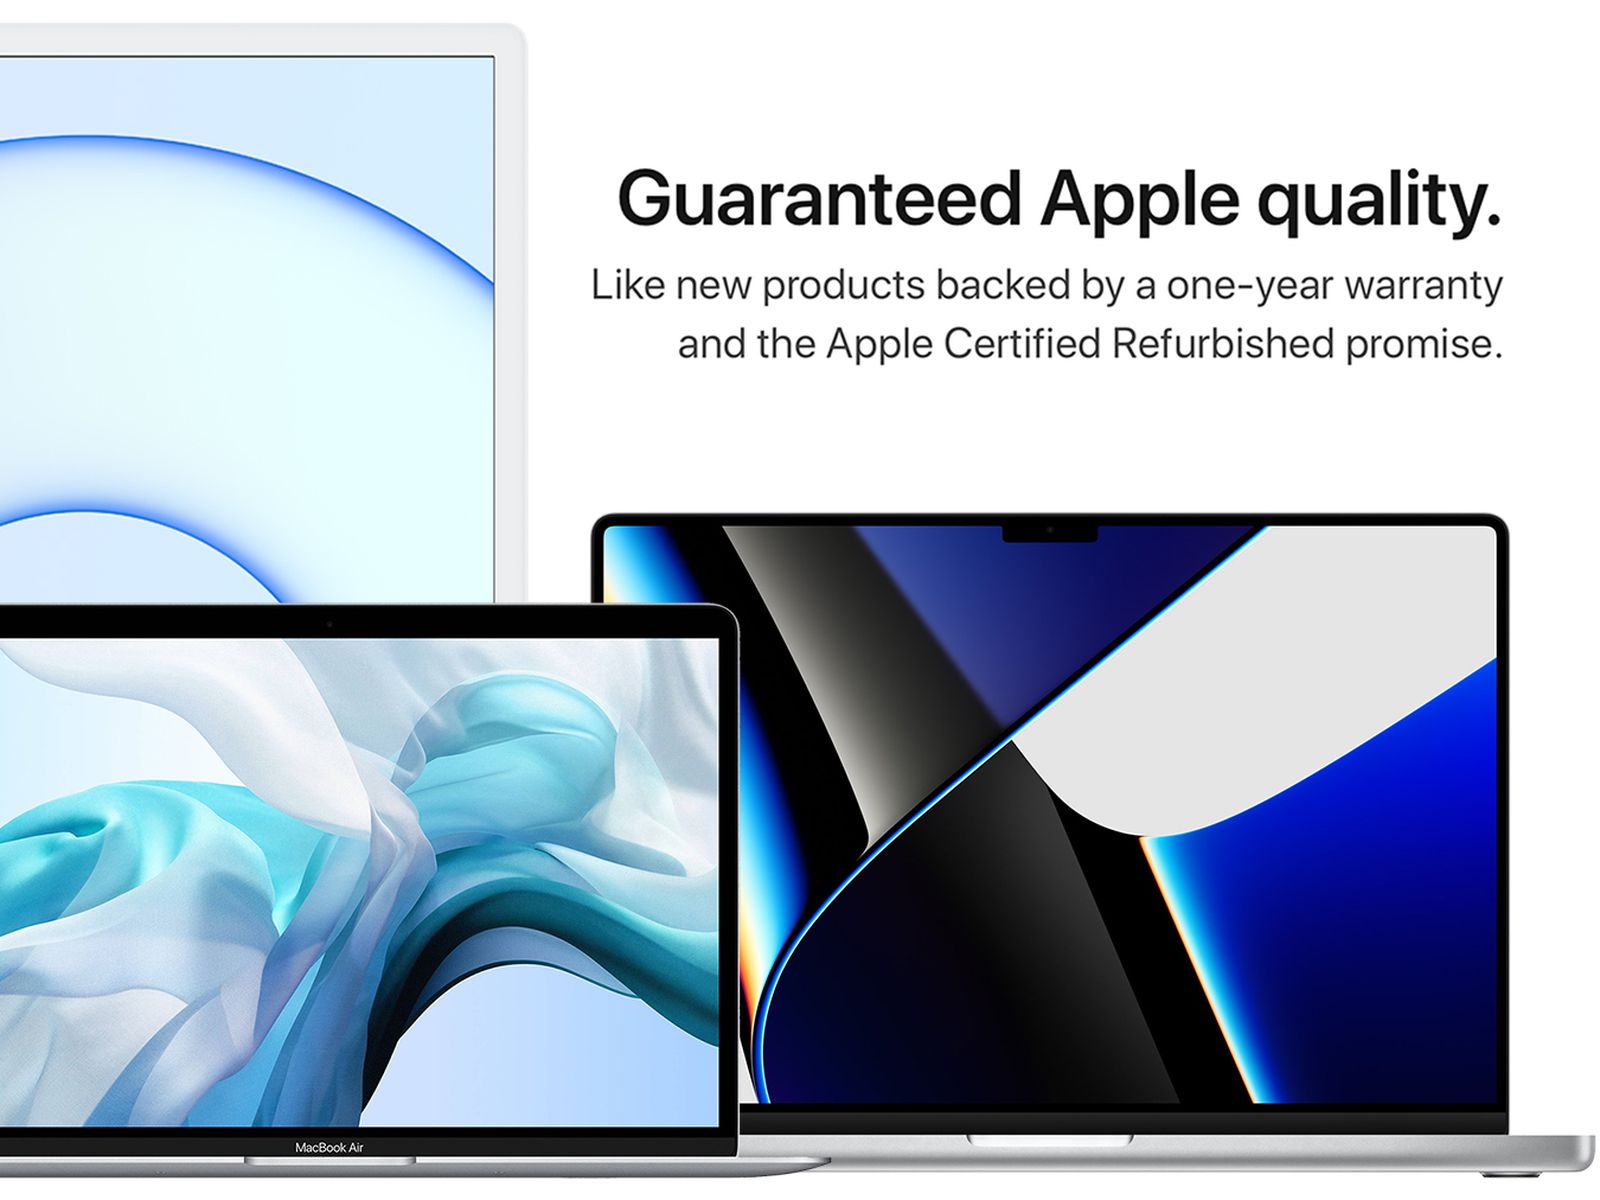 Apple Refurbished Products: Should You Buy Them? - MacRumors